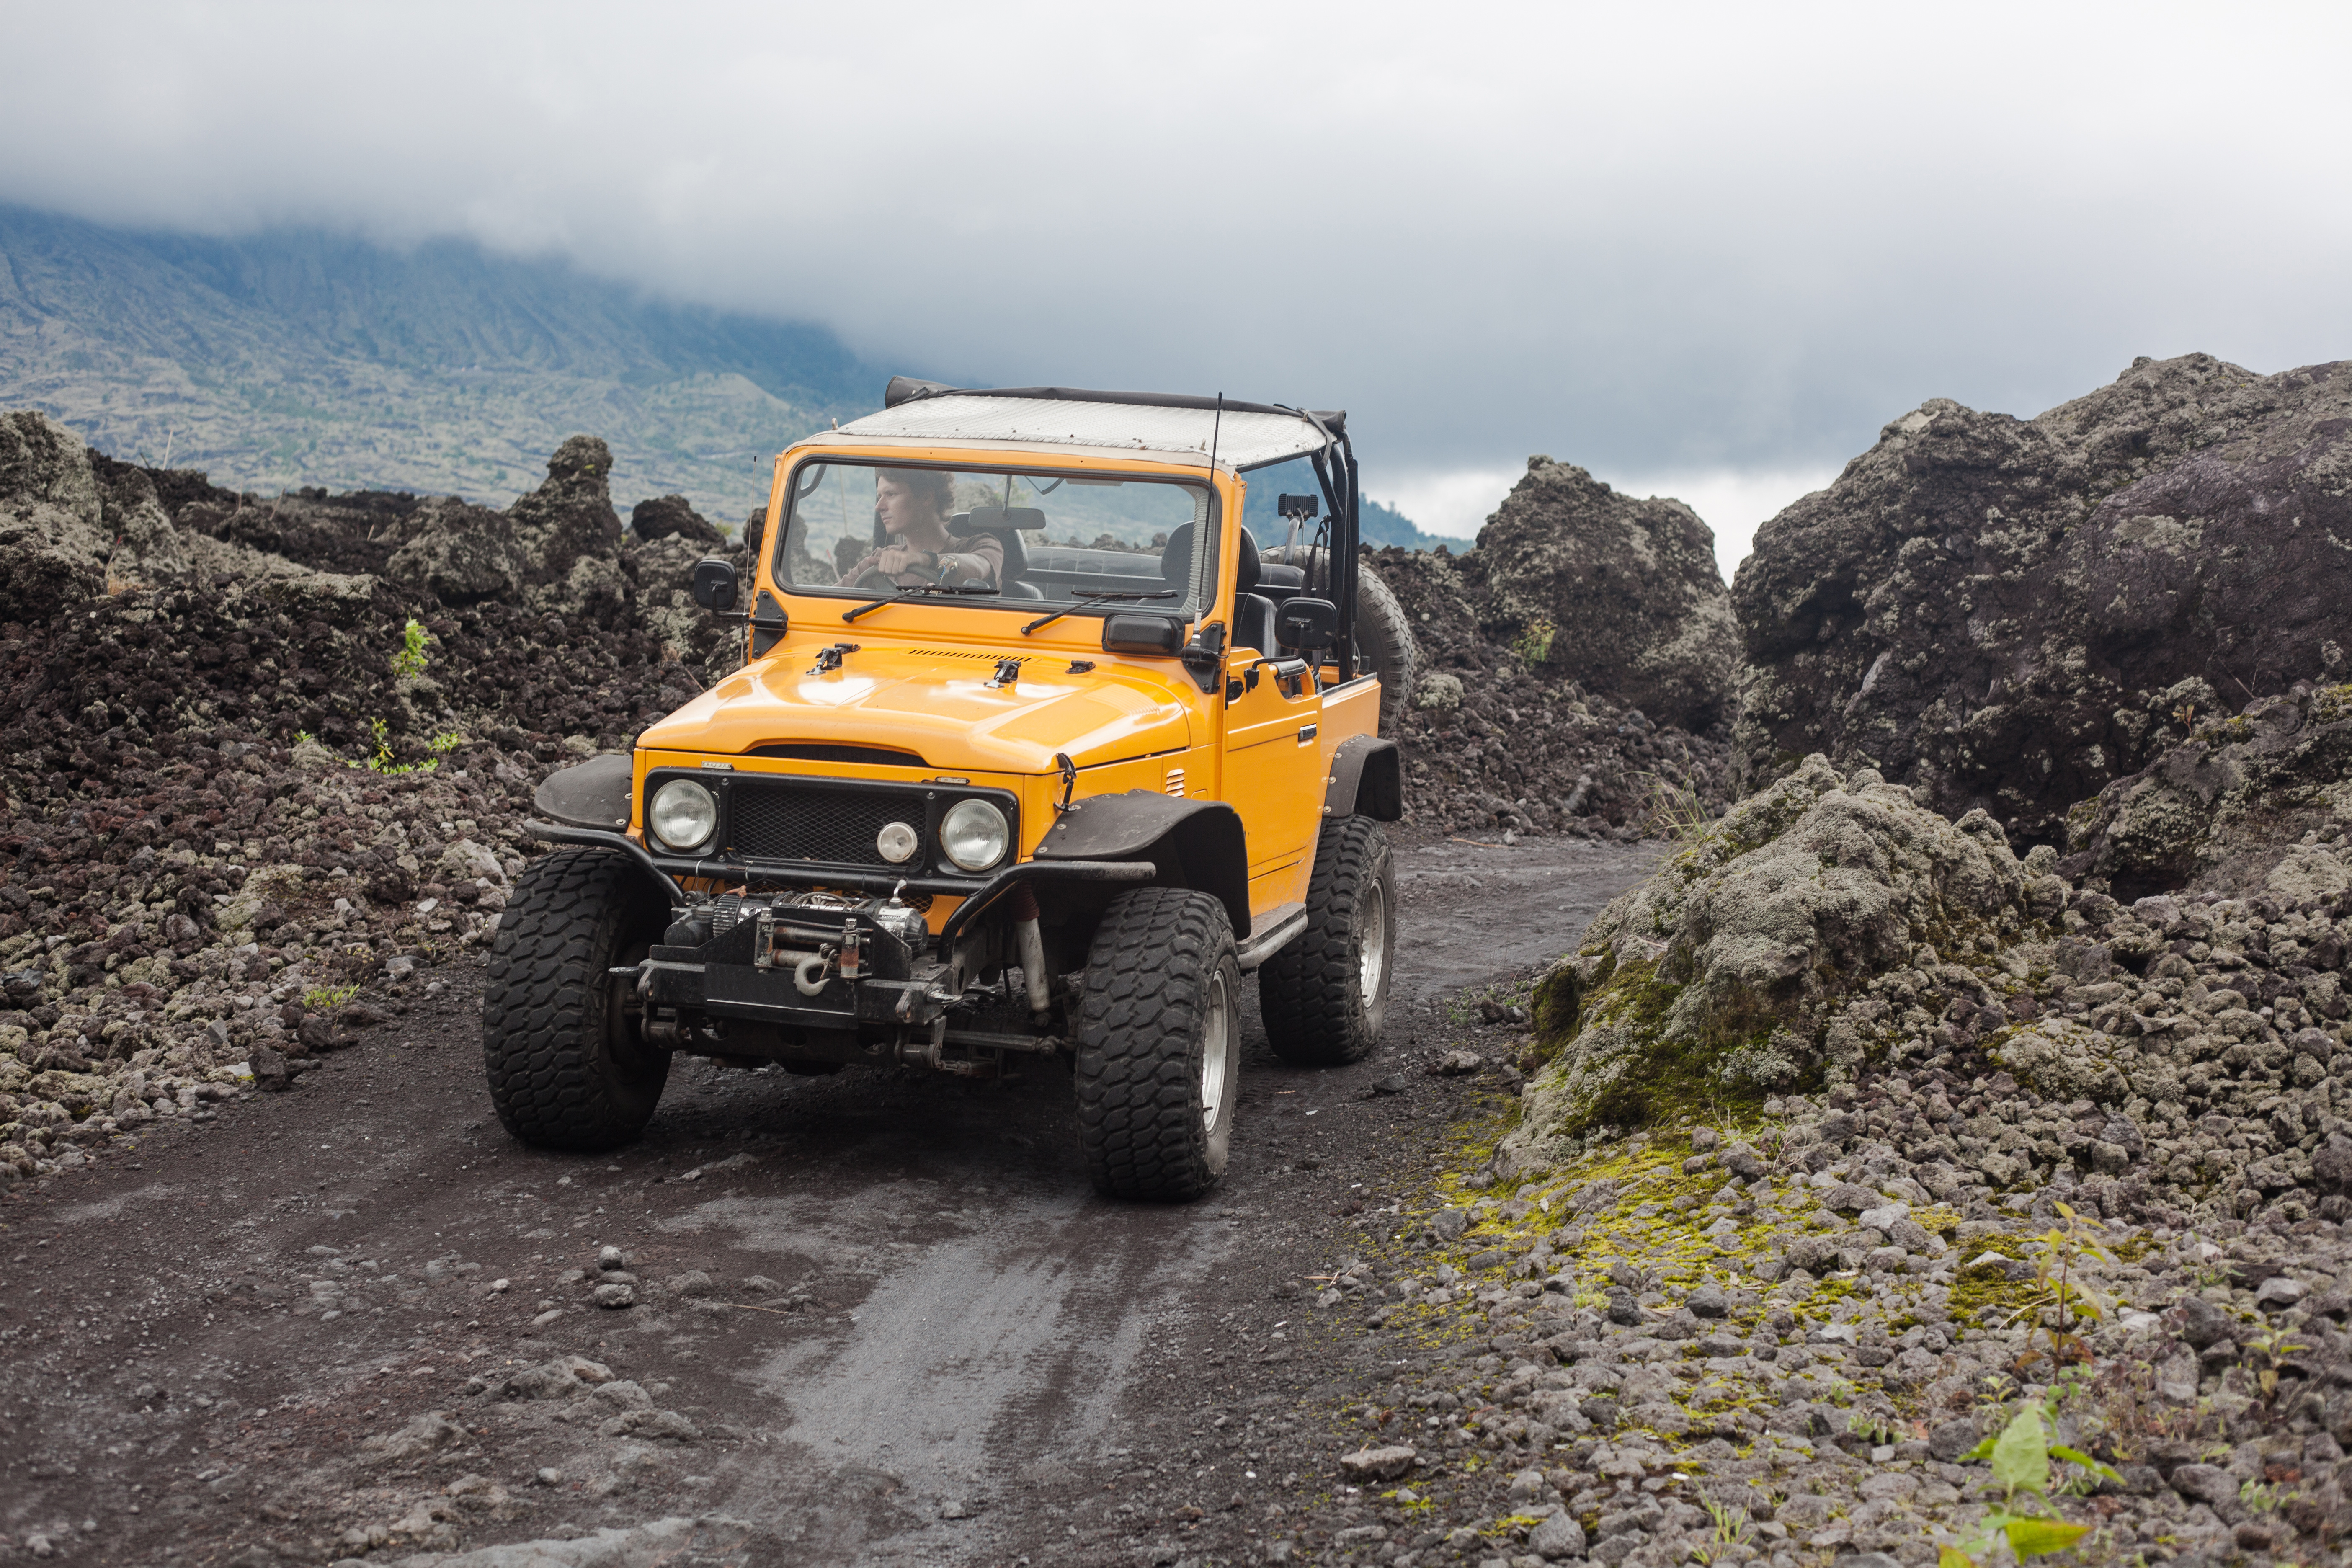 Off Roader by Nature: 8 Best Off Road Vehicles to Buy in 2019 - Motor Era